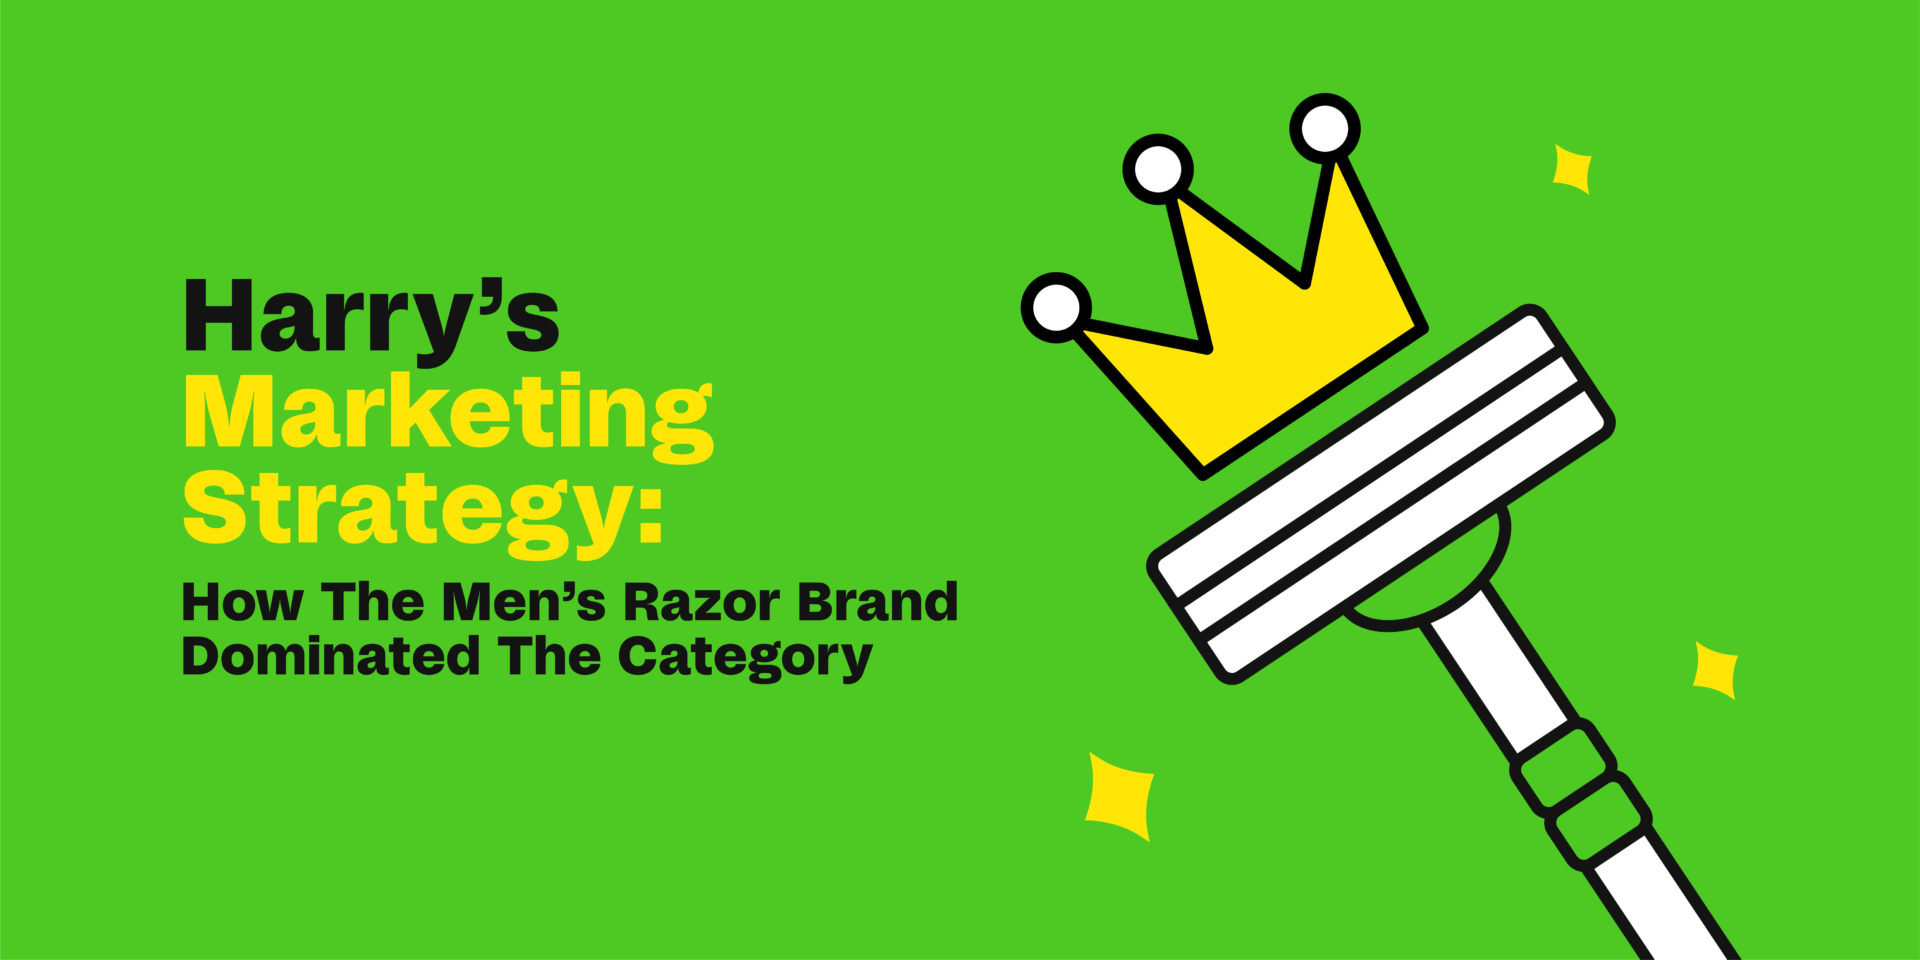 Harry's Marketing Strategy: How The Men's Razor Brand Dominated The Category